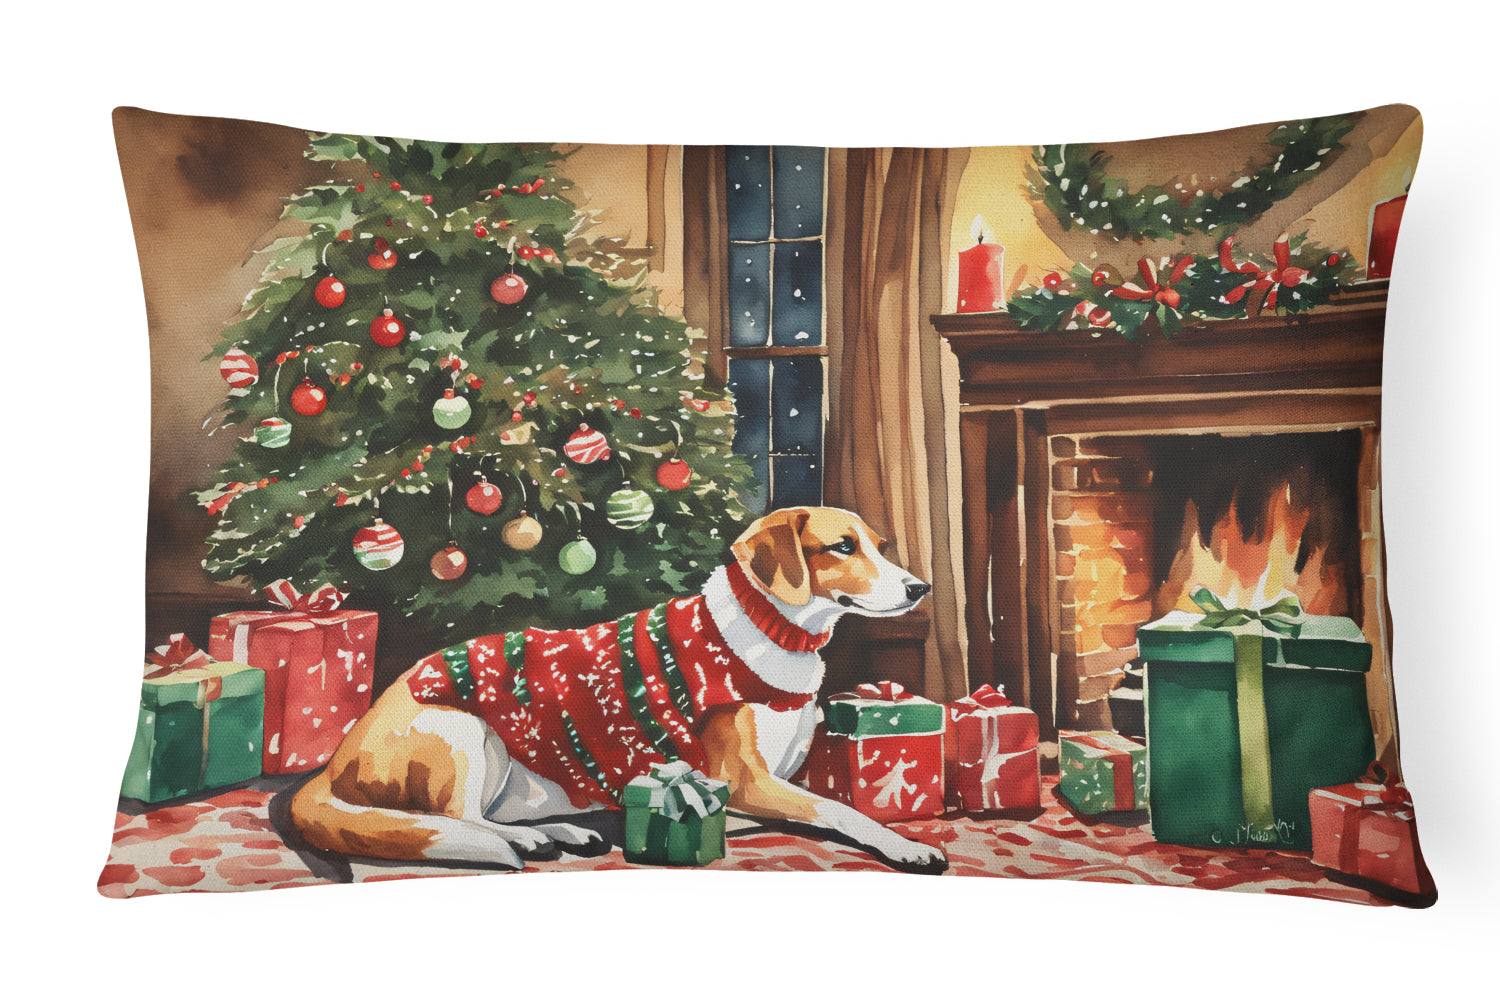 Buy this American Foxhound Cozy Christmas Throw Pillow